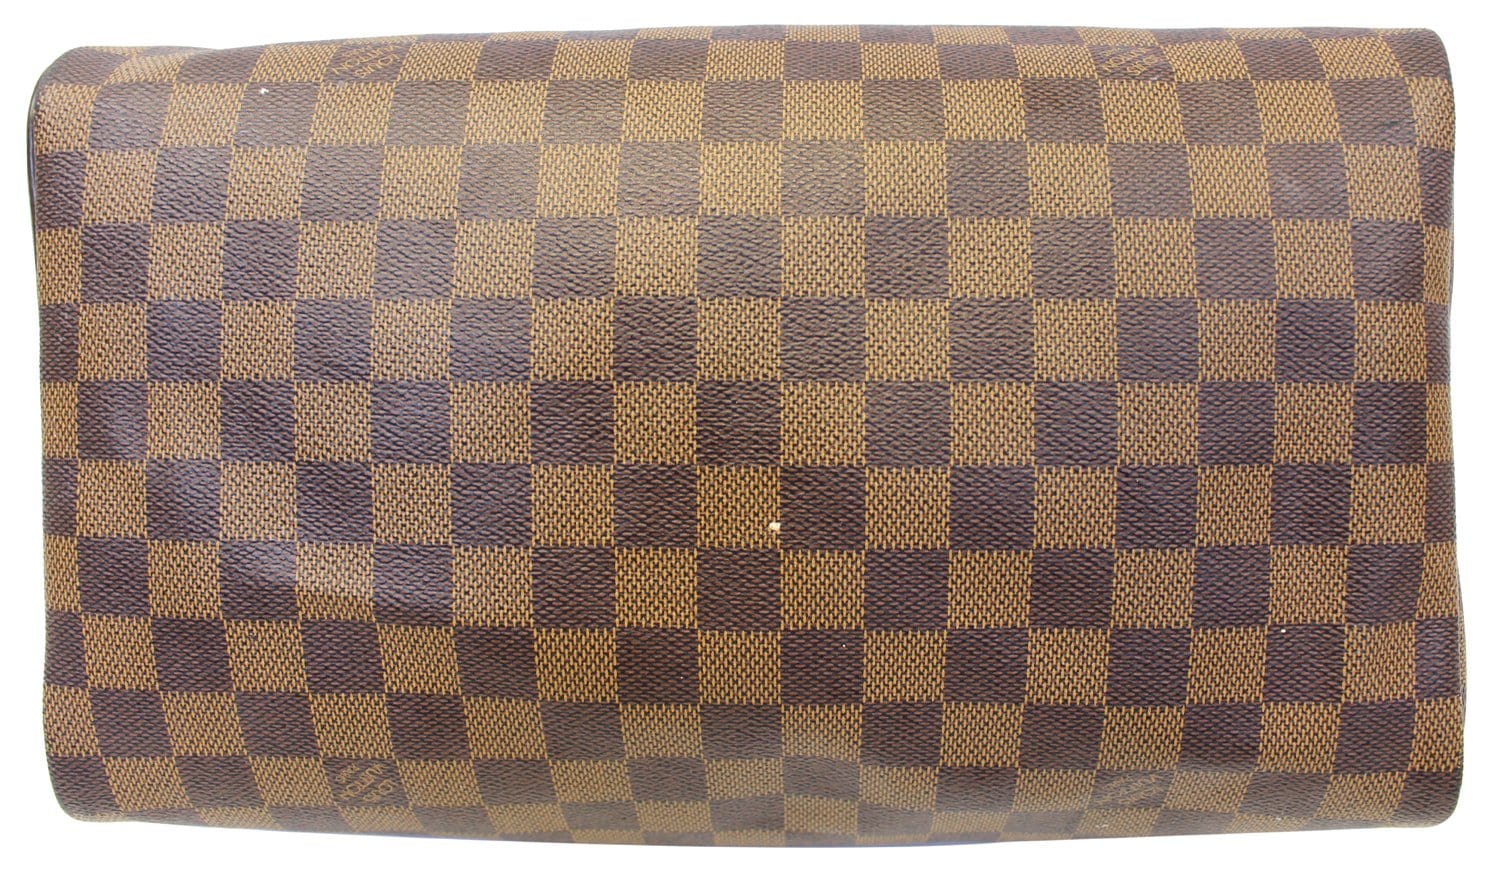 Louis Vuitton - Authenticated Speedy Bandoulière Handbag - Leather Brown Abstract for Women, Very Good Condition